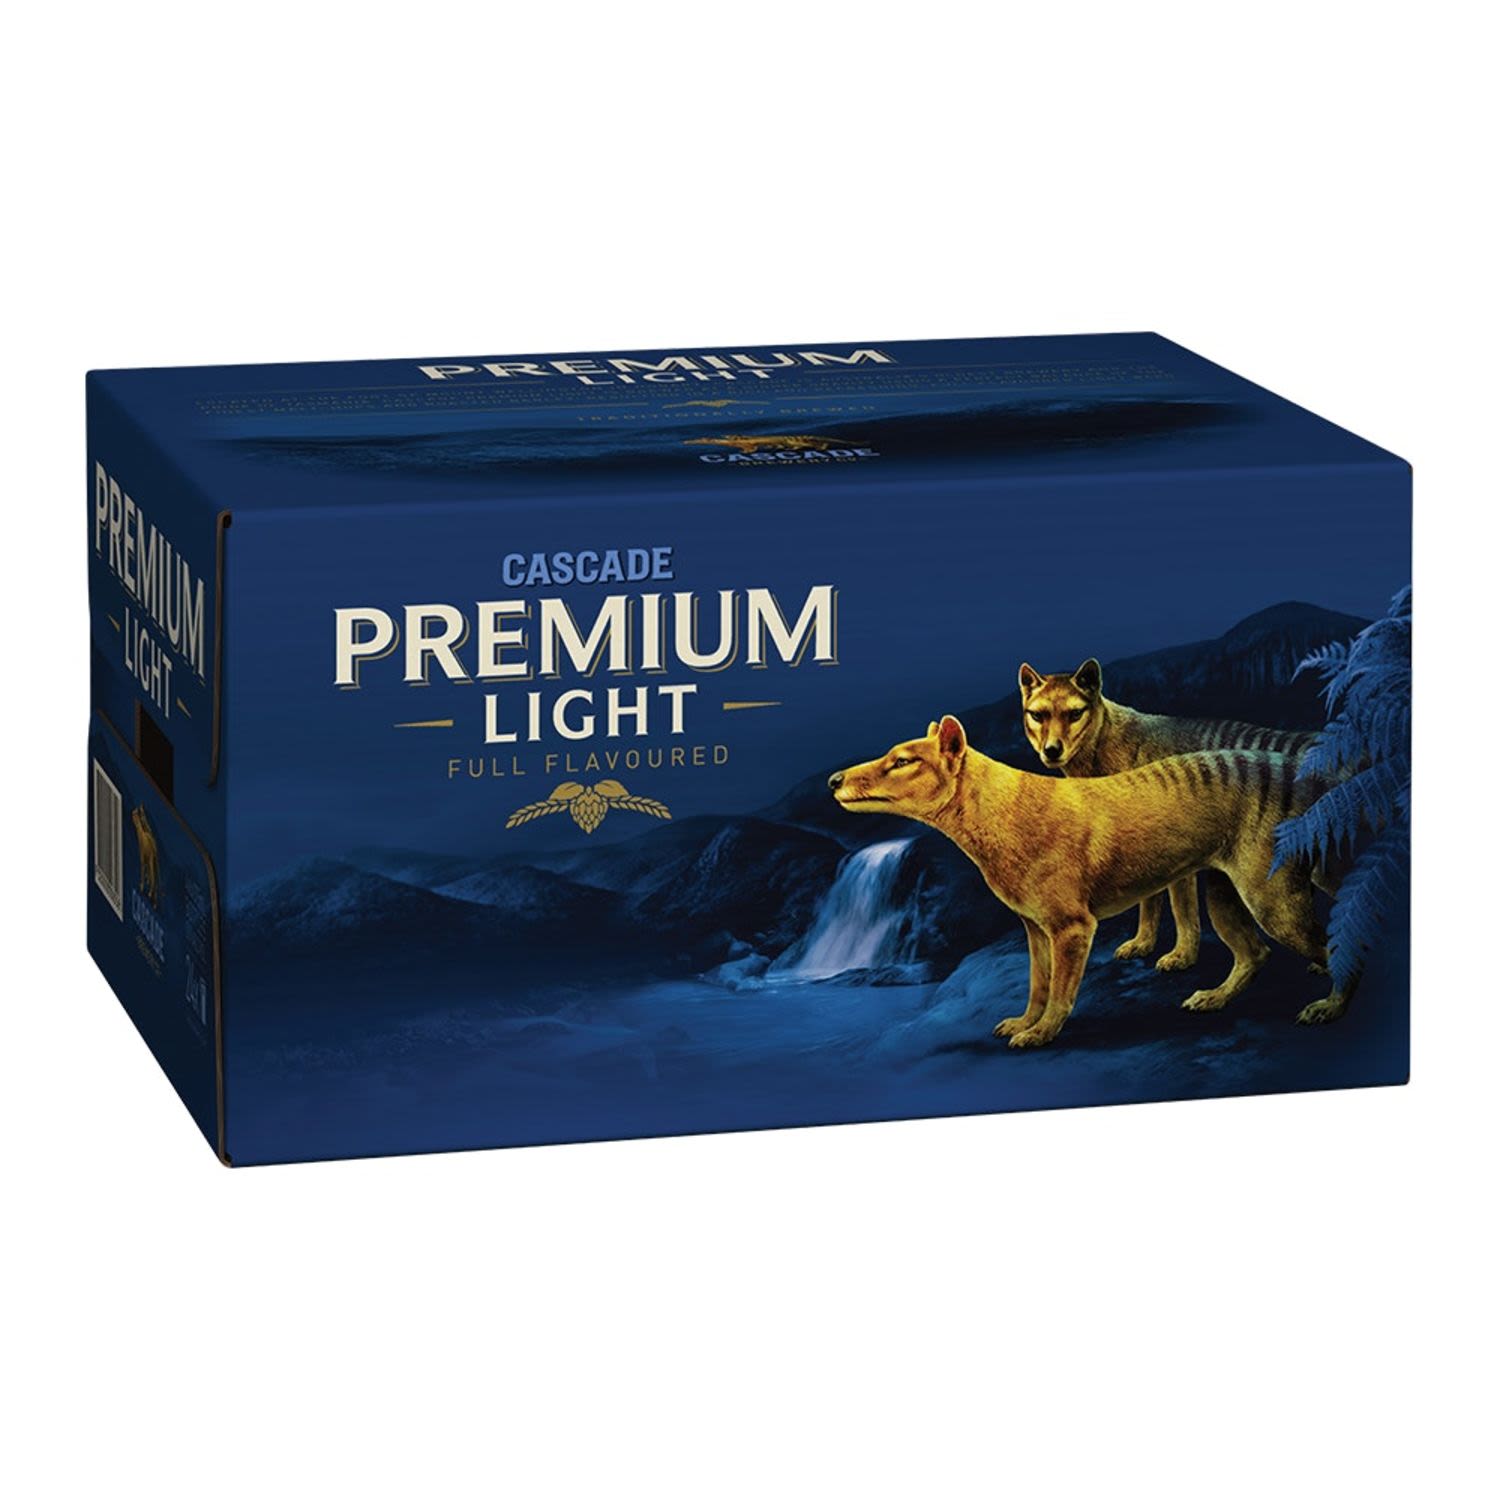 Cascade Premium Light is a perfect balance of master brewing skills, the finest malt, hops and premium yeast culture. Sparkling bright amber with a spicy hop aroma and tightly packed head.<br /> <br />Alcohol Volume: 2.40%<br /><br />Pack Format: 24 Pack<br /><br />Standard Drinks: 0.7</br /><br />Pack Type: Bottle<br /><br />Country of Origin: Australia<br />